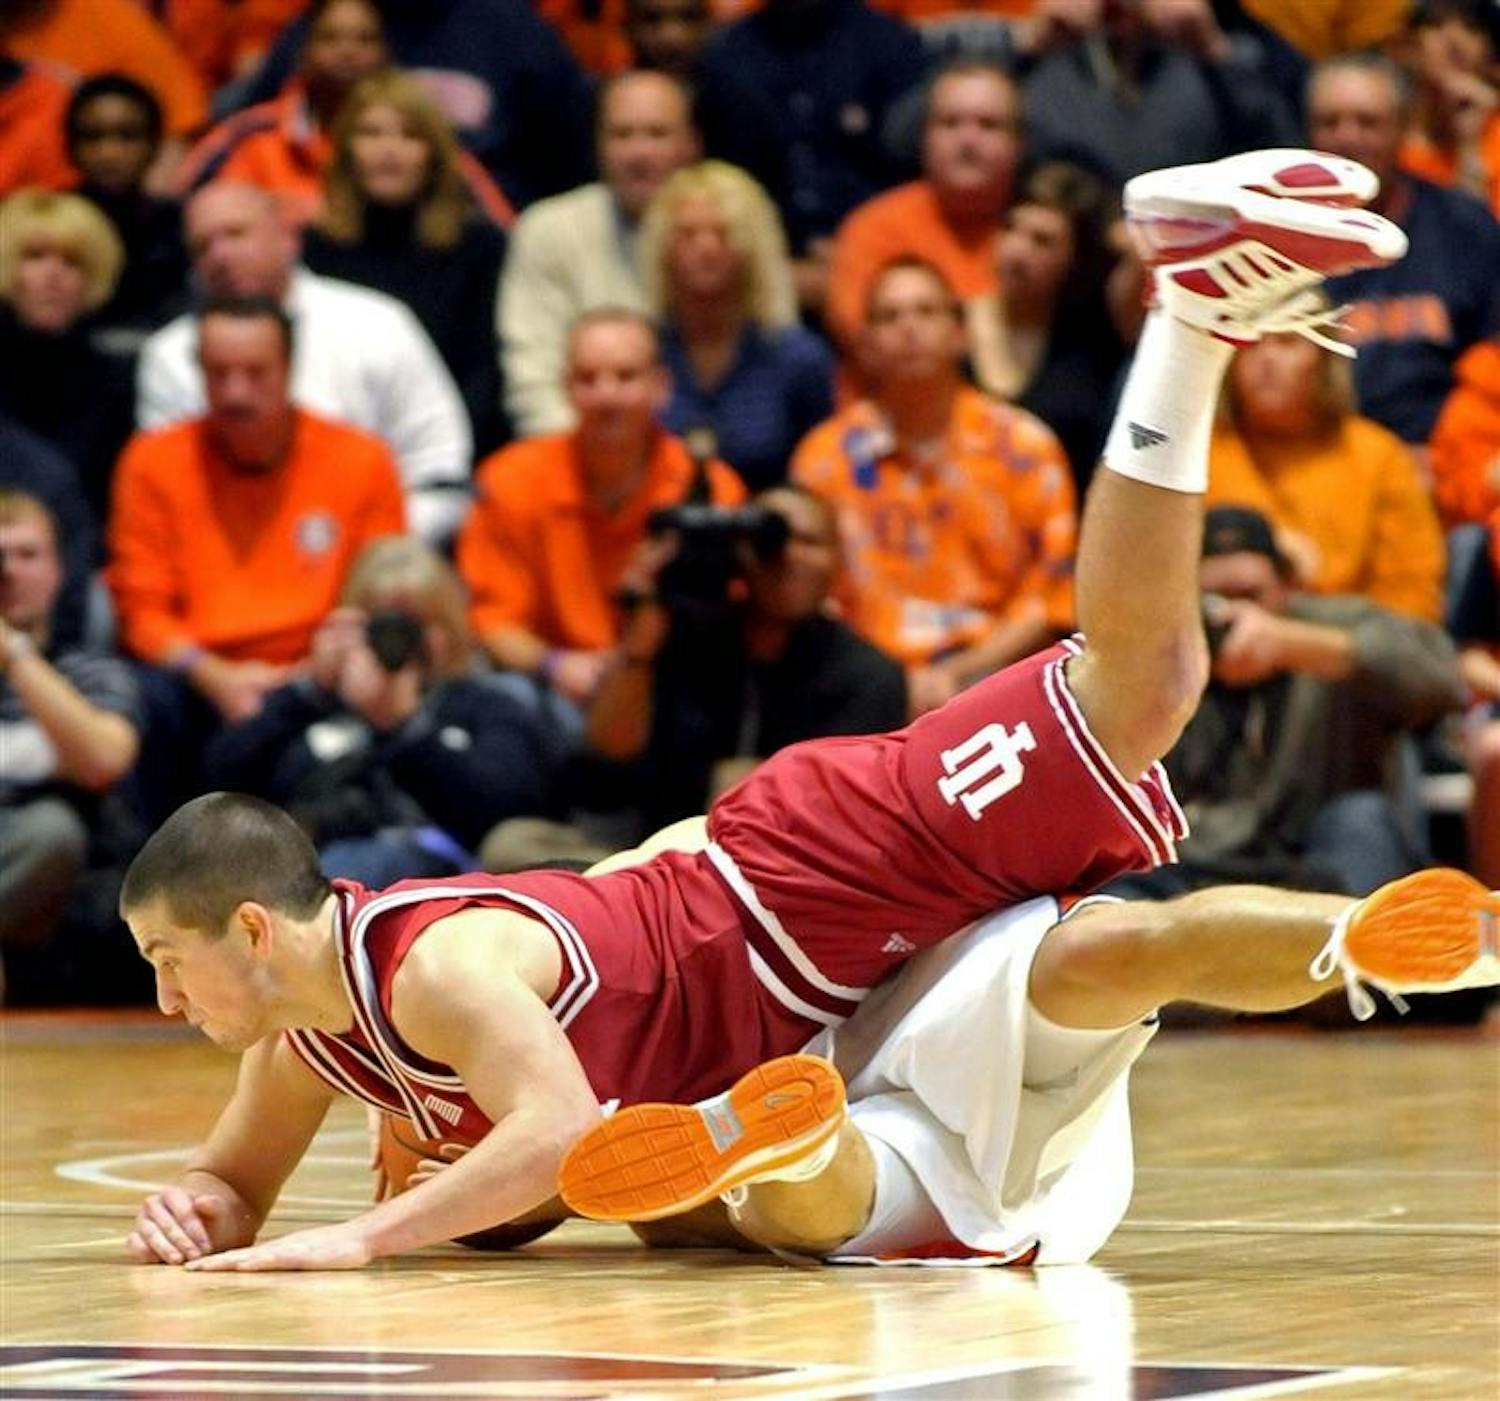 IU freshman Daniel Moore (3) pancakes Illinois' Trent Meacham (1) as he dives for a loose ball in the second half of a 76-45 IU loss in Champaign, Ill. The defeat was the Hoosiers' sixth consecutive and eighth in their last nine games.